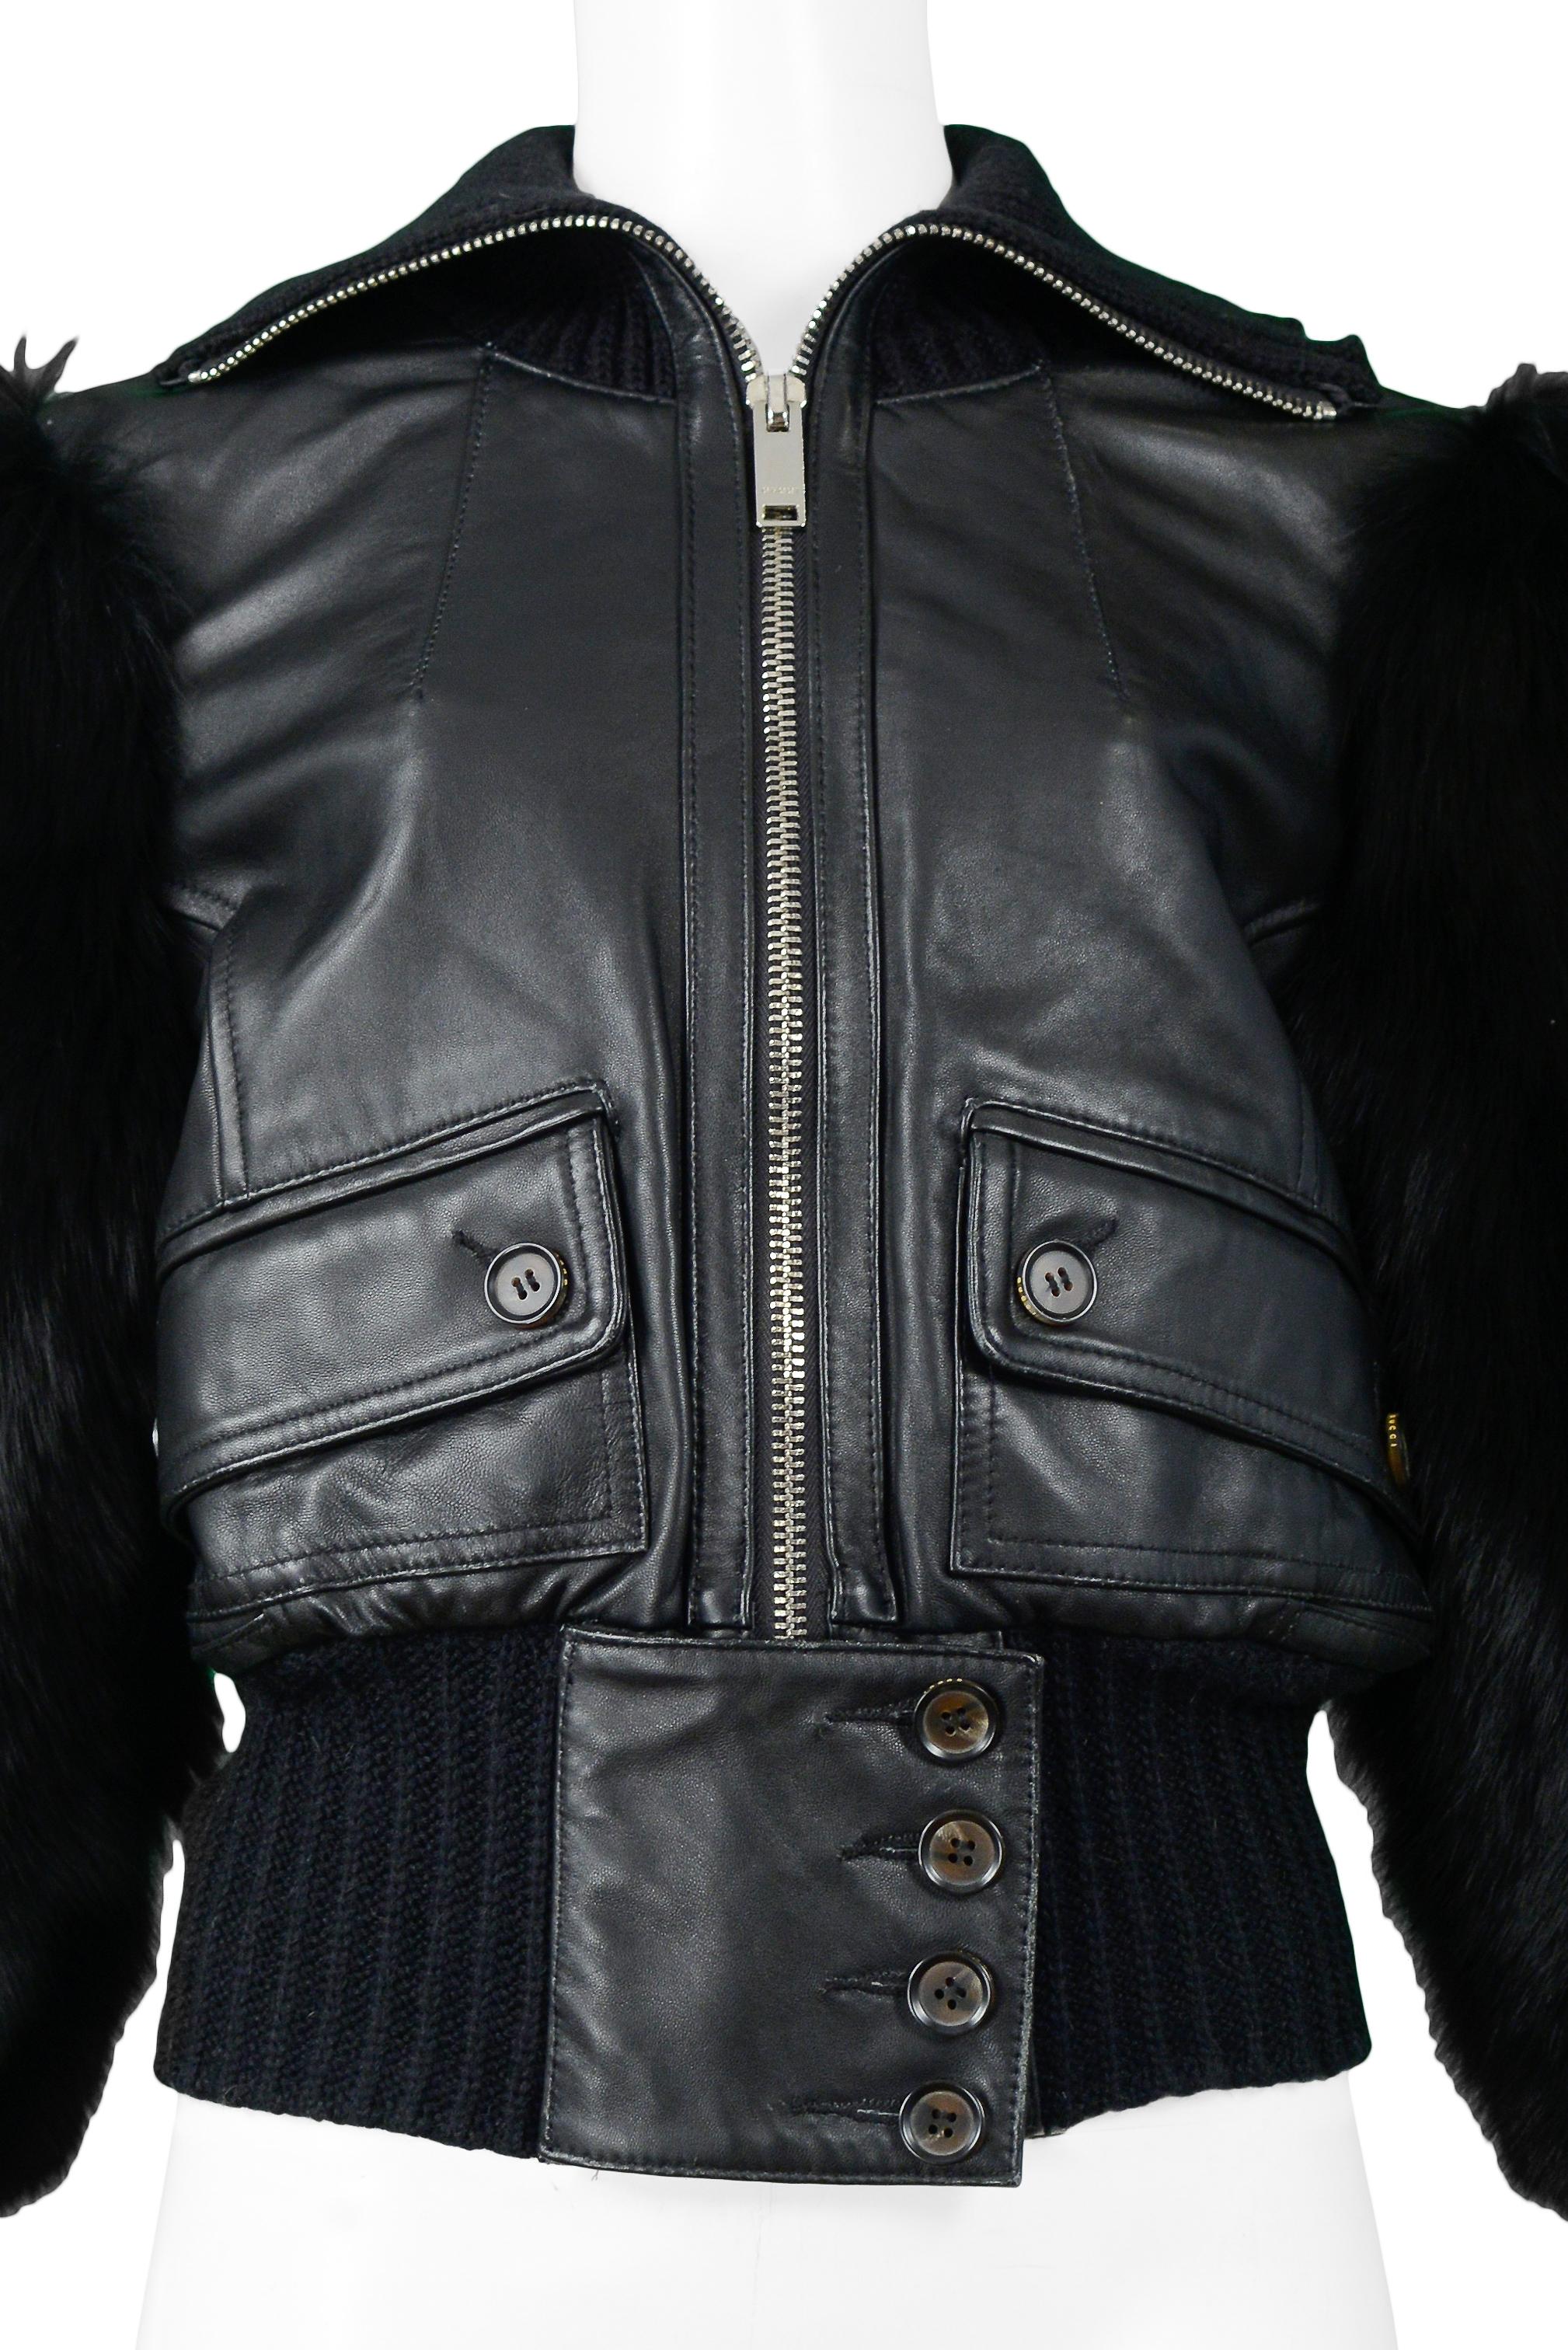 Gucci By Tom Ford Leather & Fox Fur Jacket 2003 In Excellent Condition For Sale In Los Angeles, CA